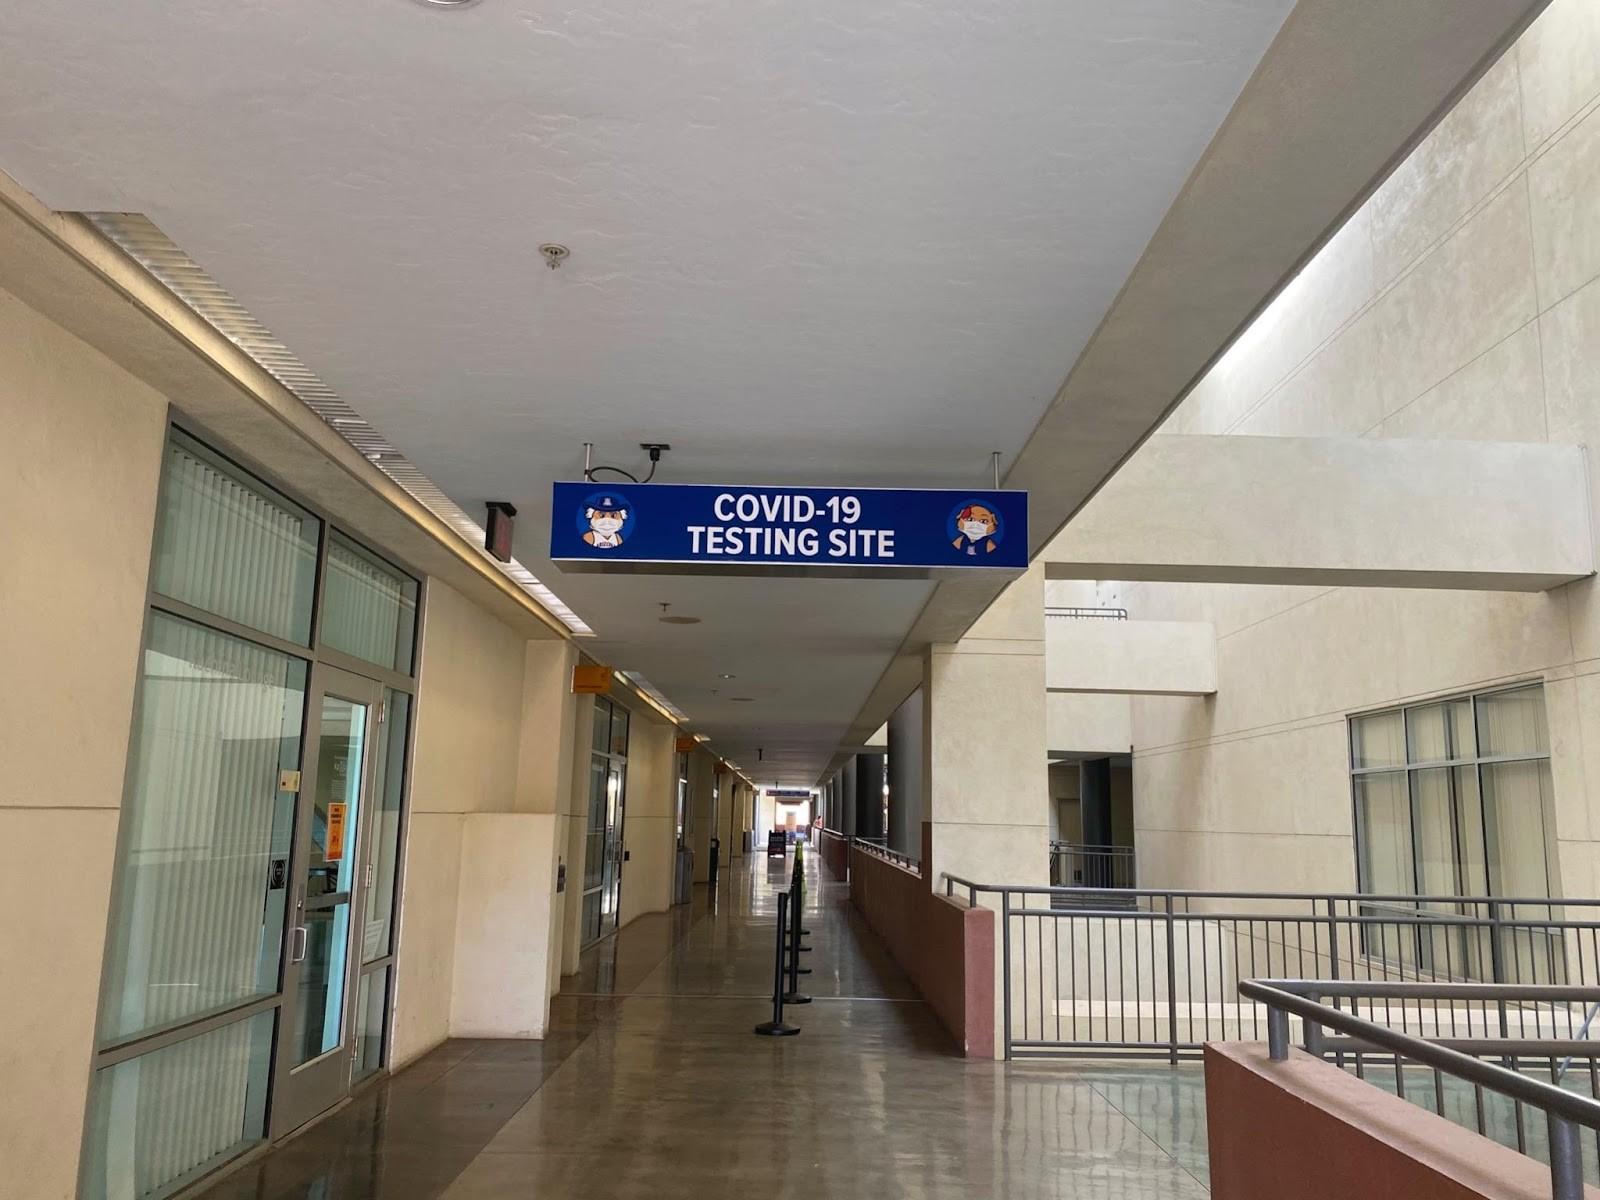 A COVID-19 testing site sign hangs in a Student Union Memorial Center hallway. (Courtesy Genavieve Sinner)